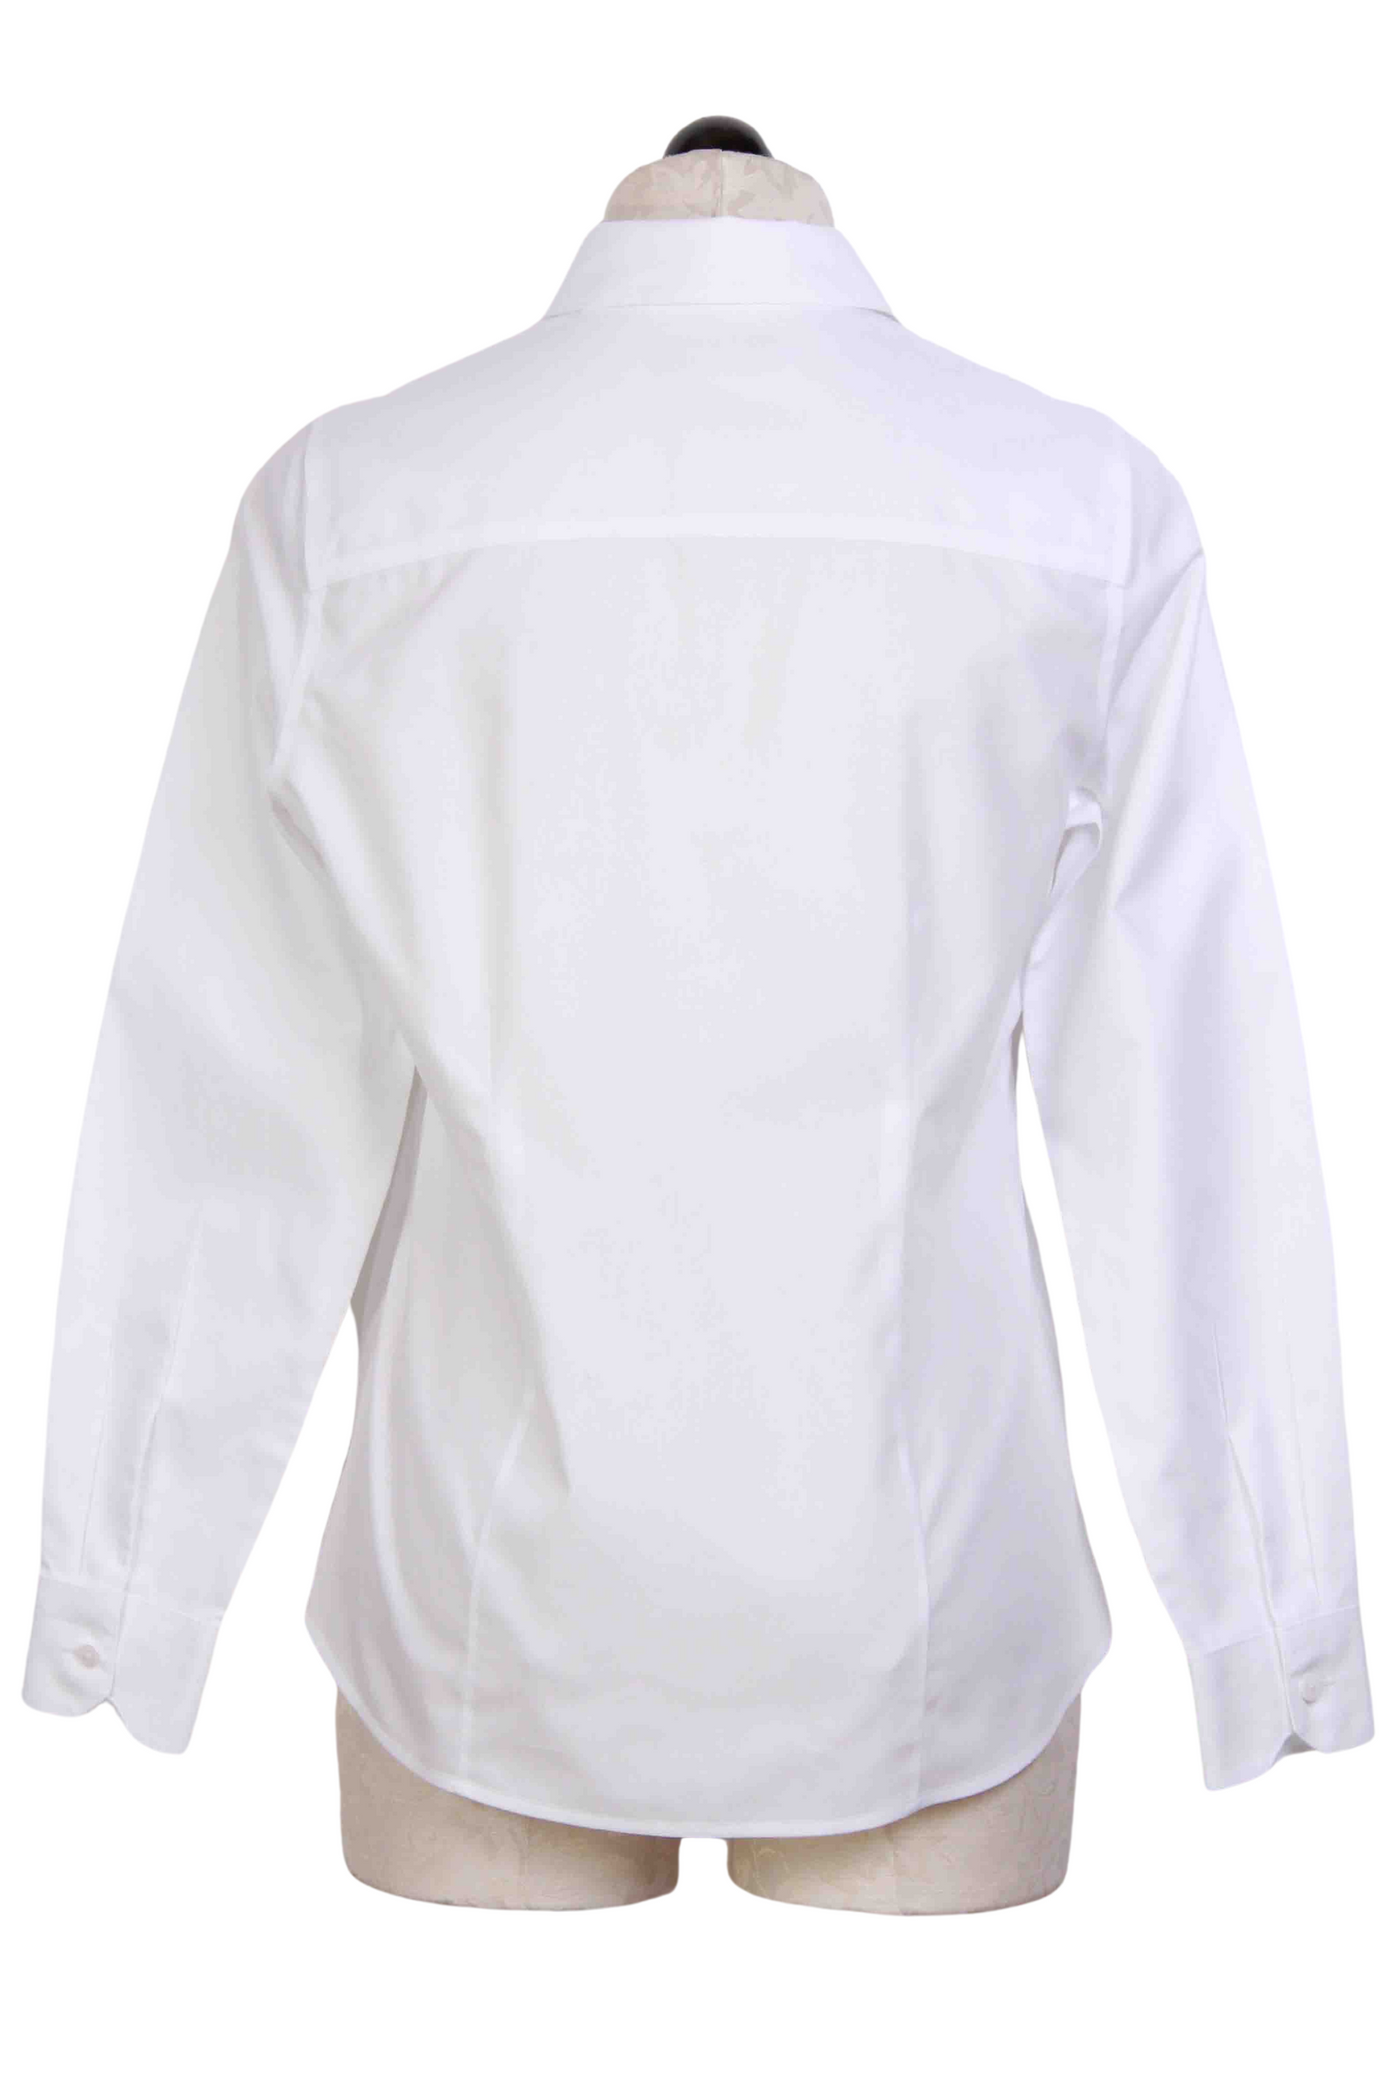 back view of White Classic collared, tailored Dianna blouse by Foxcroft